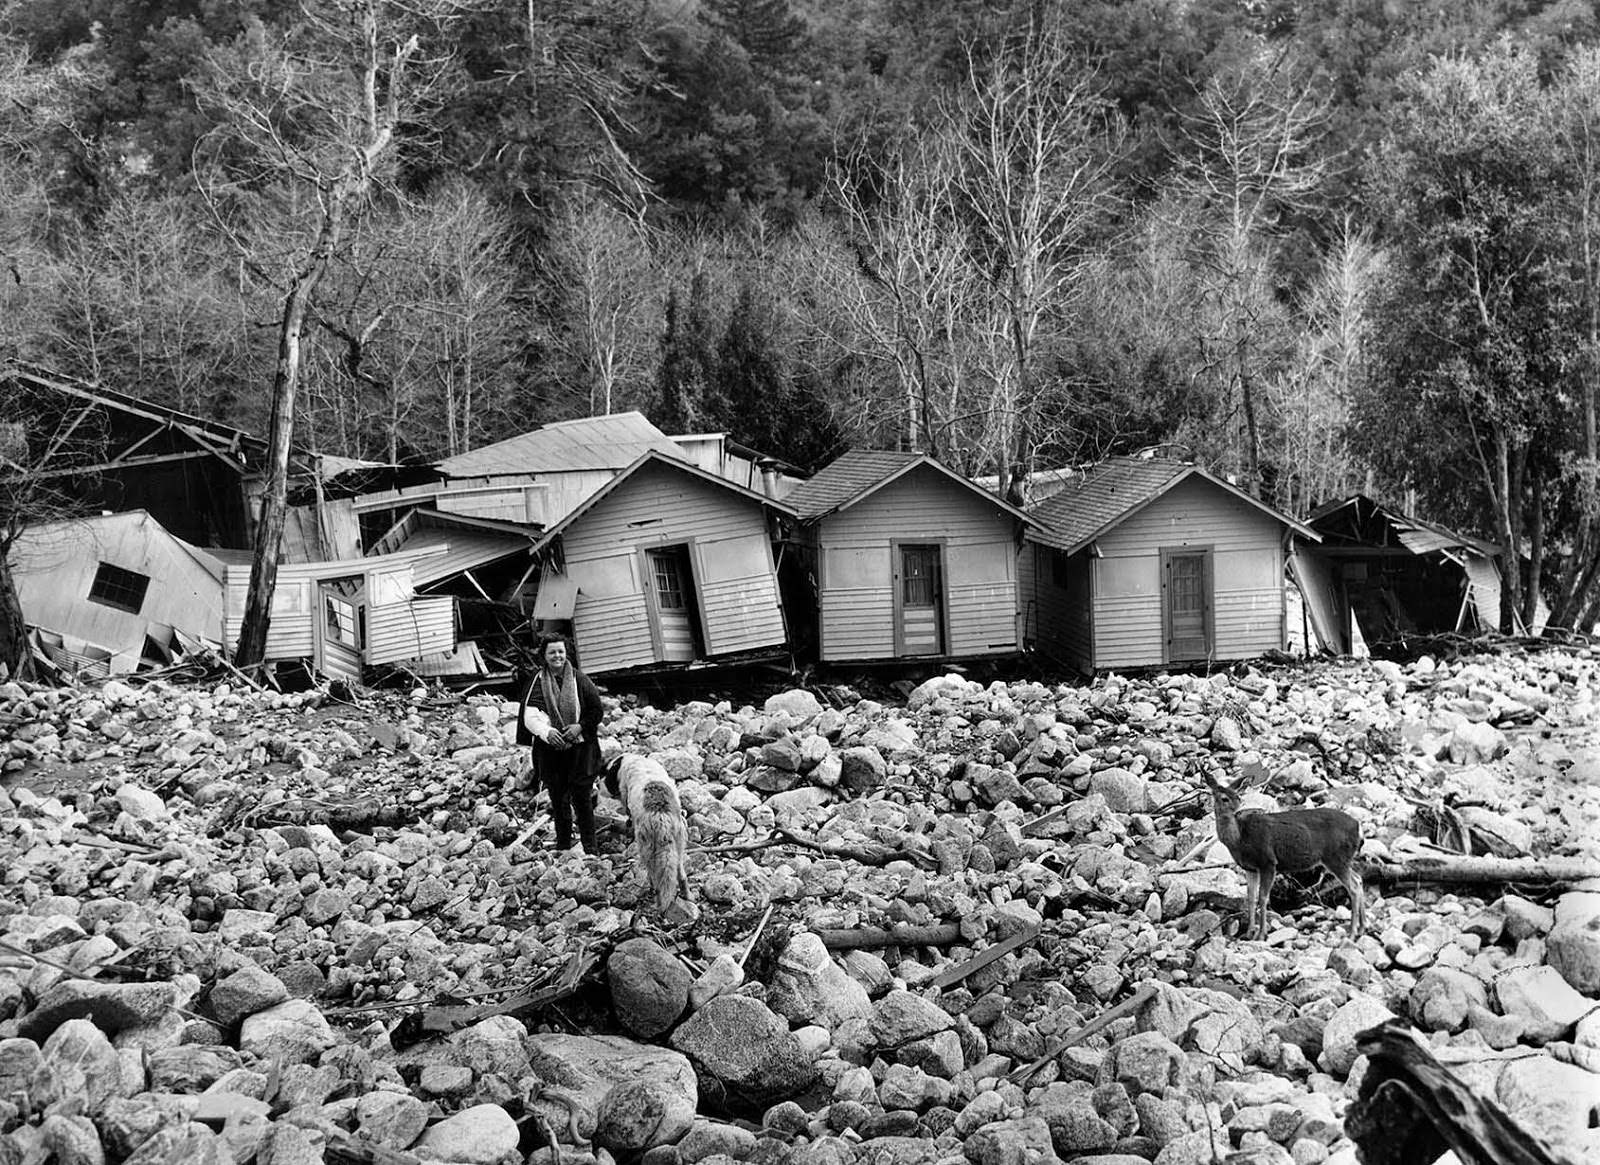 Ruth Curry, with a broken arm, owner of Camp Baldy resort, stands in front of shattered cabins after floodwaters destroyed the majority of them, 1938